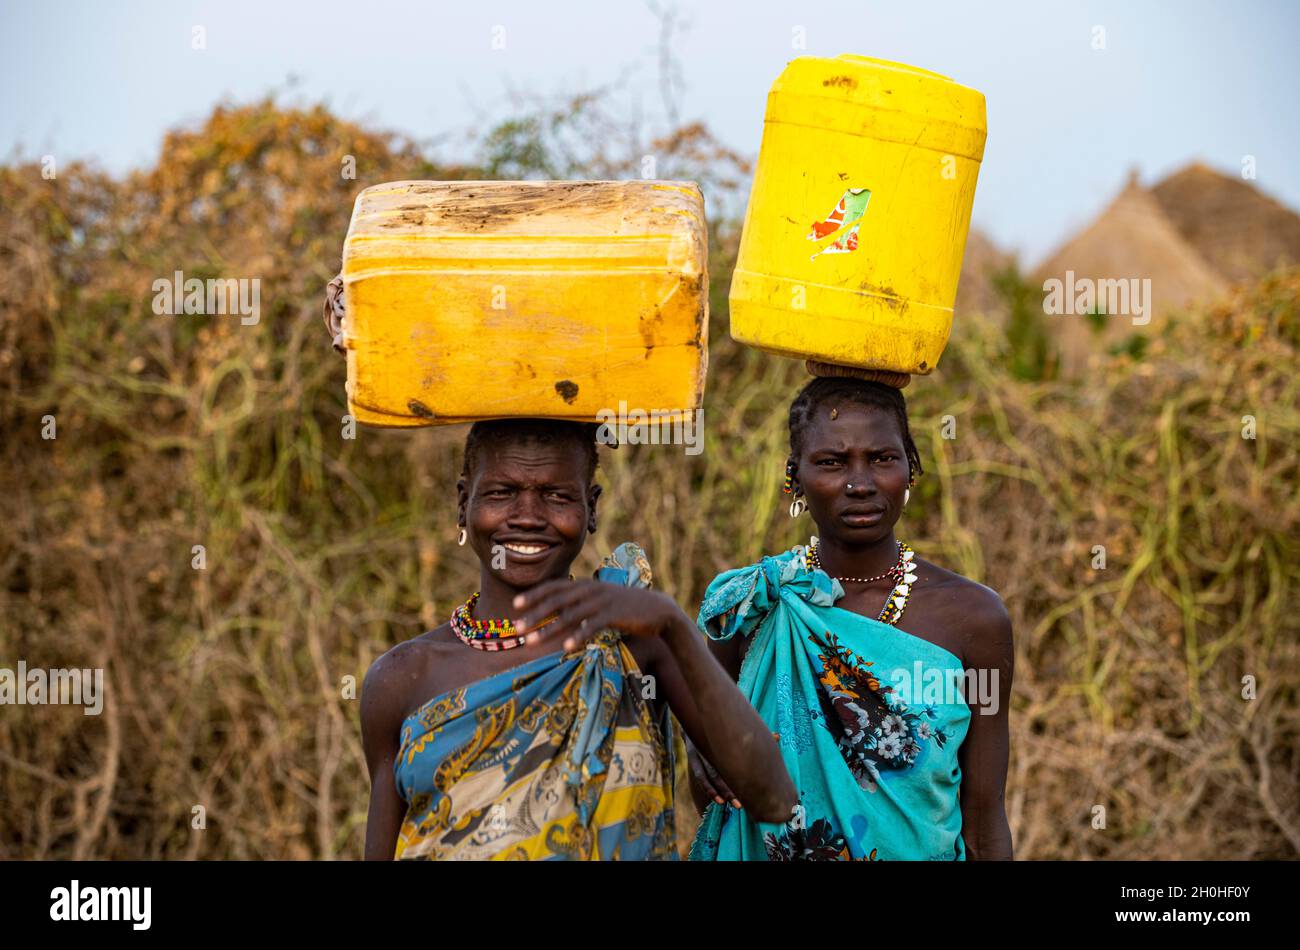 Traditional dressed women carrying water containers, Jiye tribe, Eastern Equatoria State, South Sudan Stock Photo